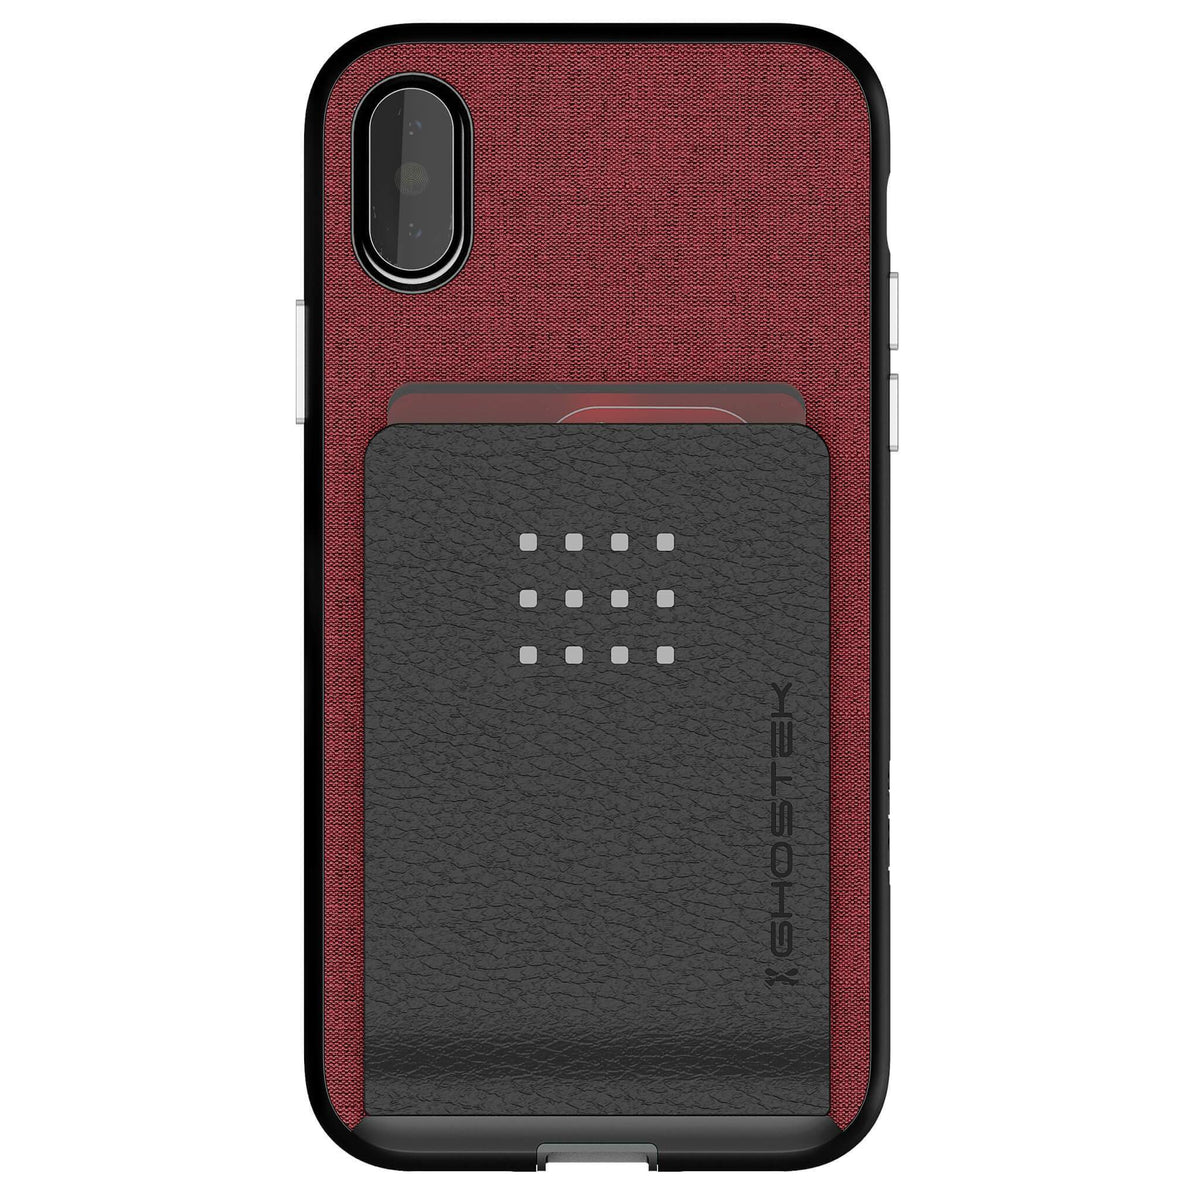 IPhone X XS or XS Max Personalised Trunk Phone Case 